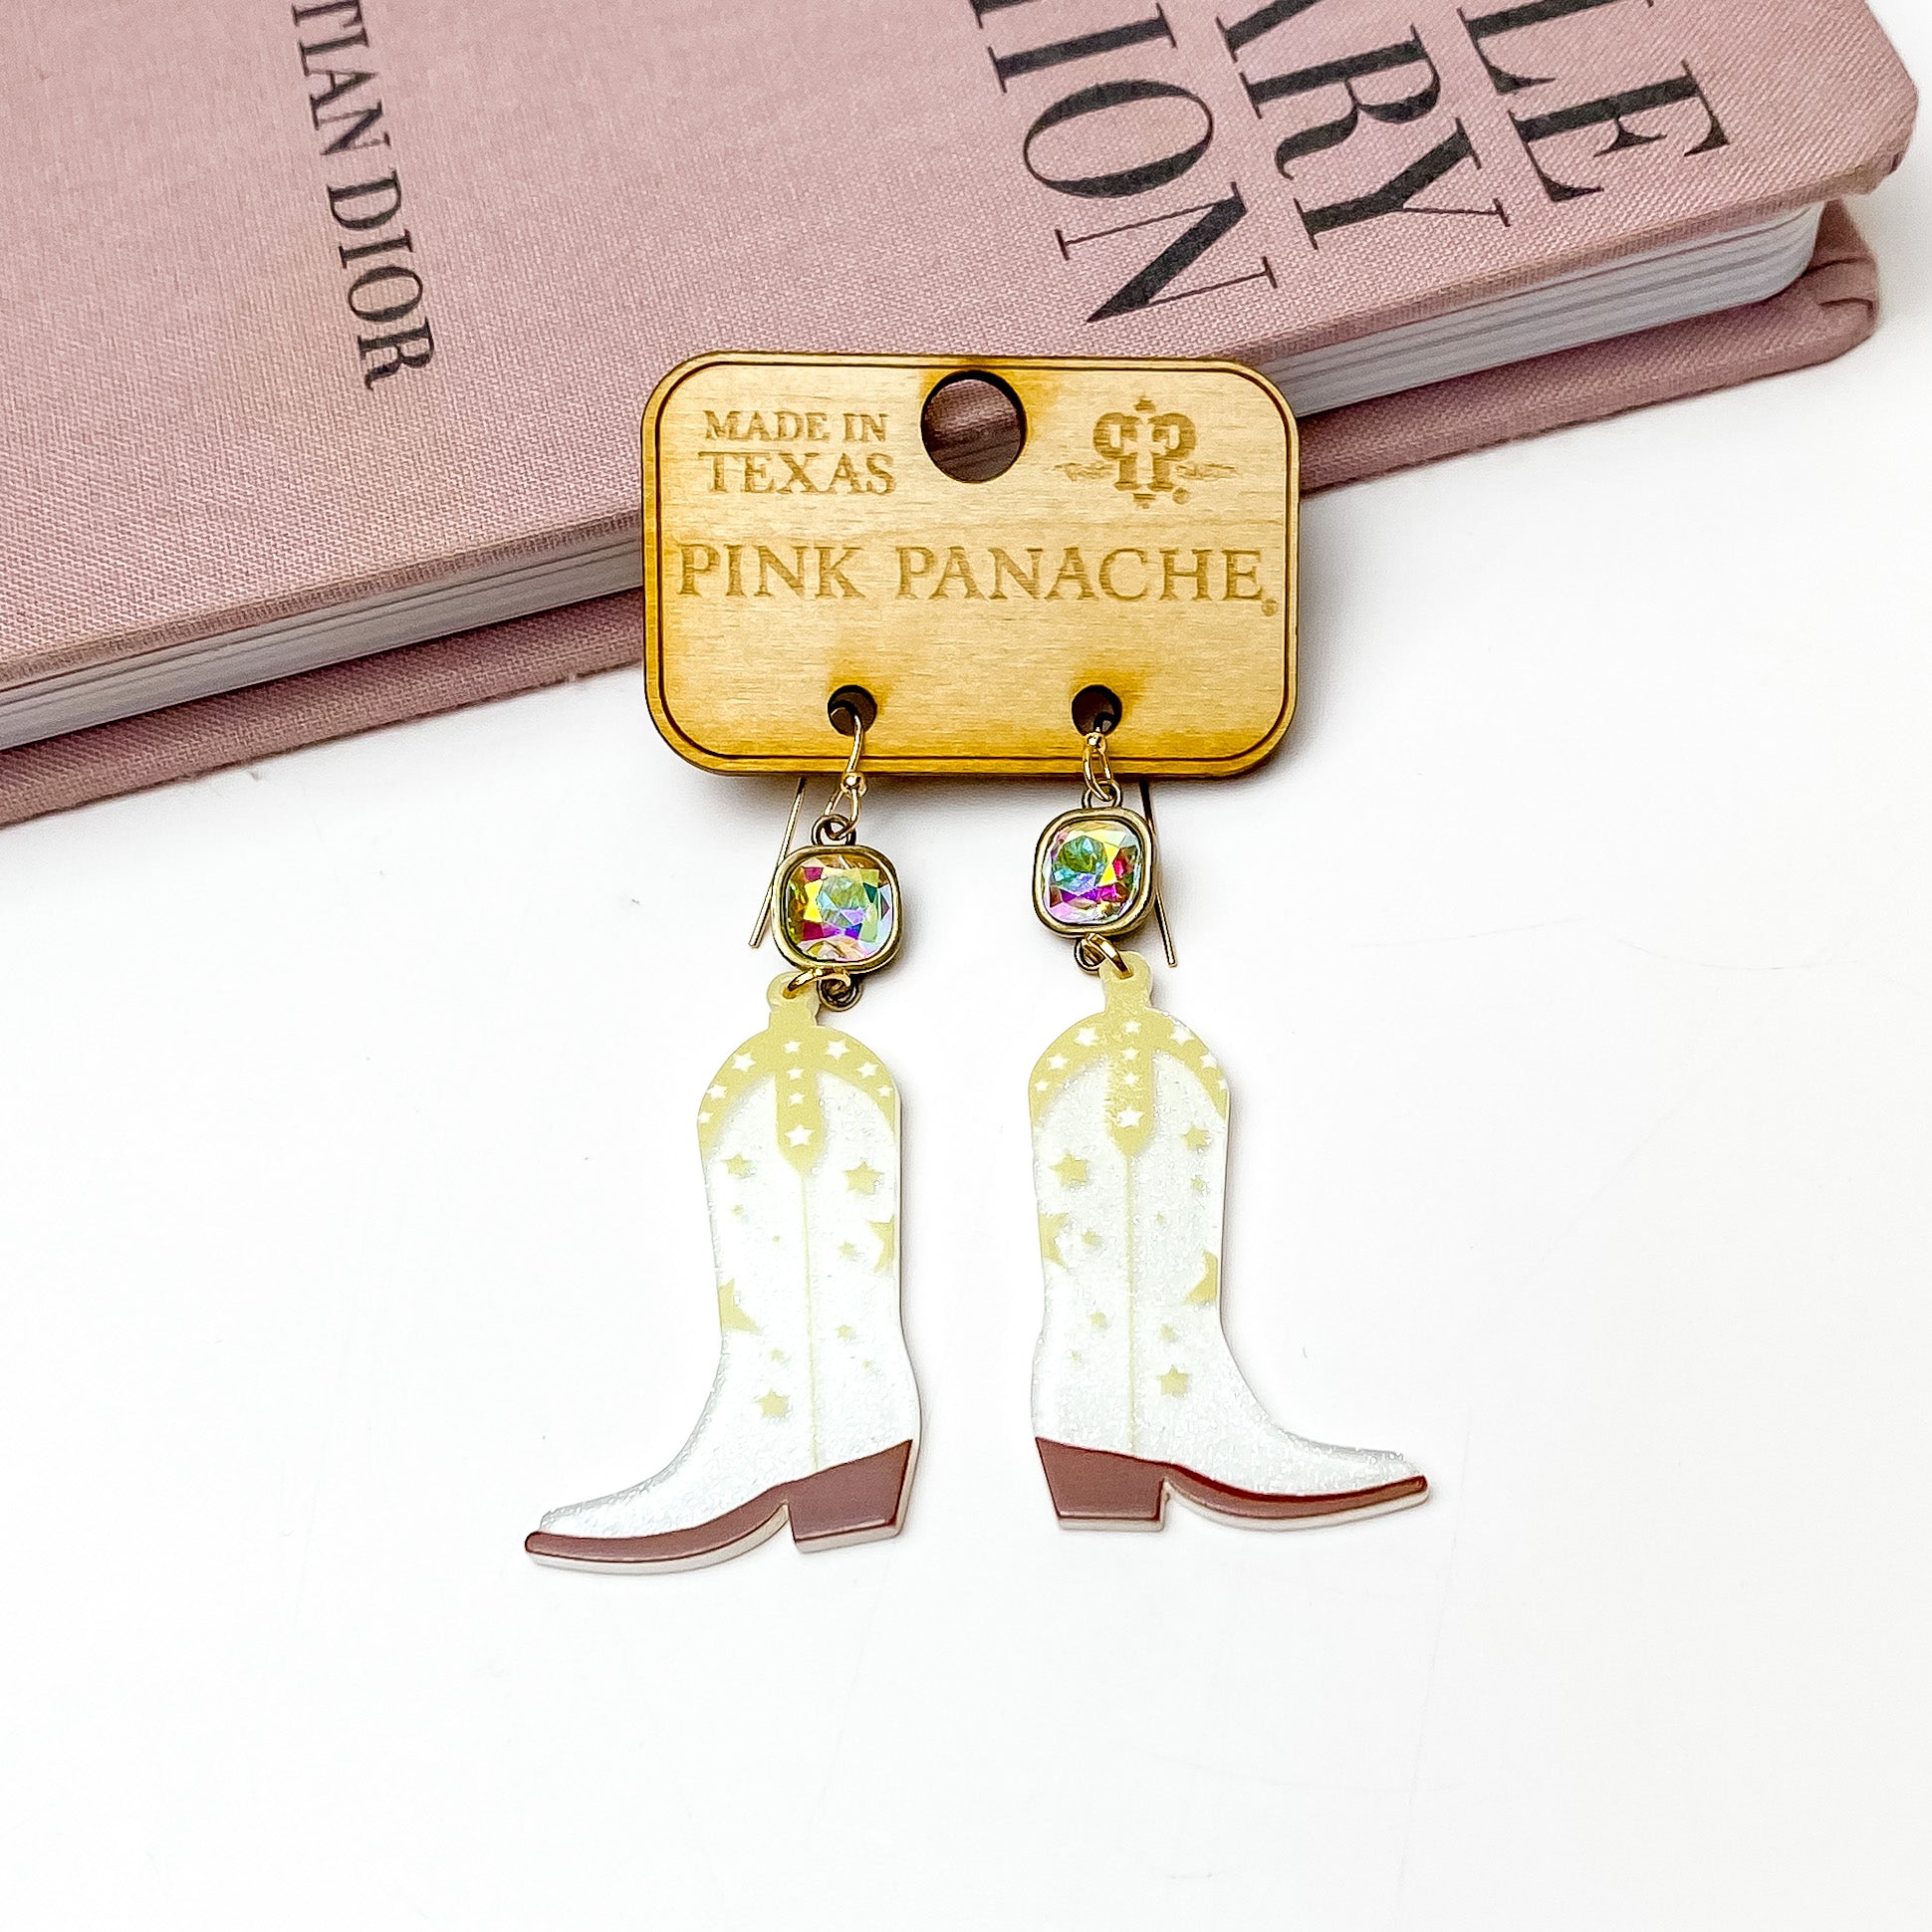 AB cushion cut crystal drop earrings with a white glitter boot pendants. These boot pendants have cream and brown accents. These earrings are pictured on a wooden earring holder on a white background in front of a mauve colored book. 